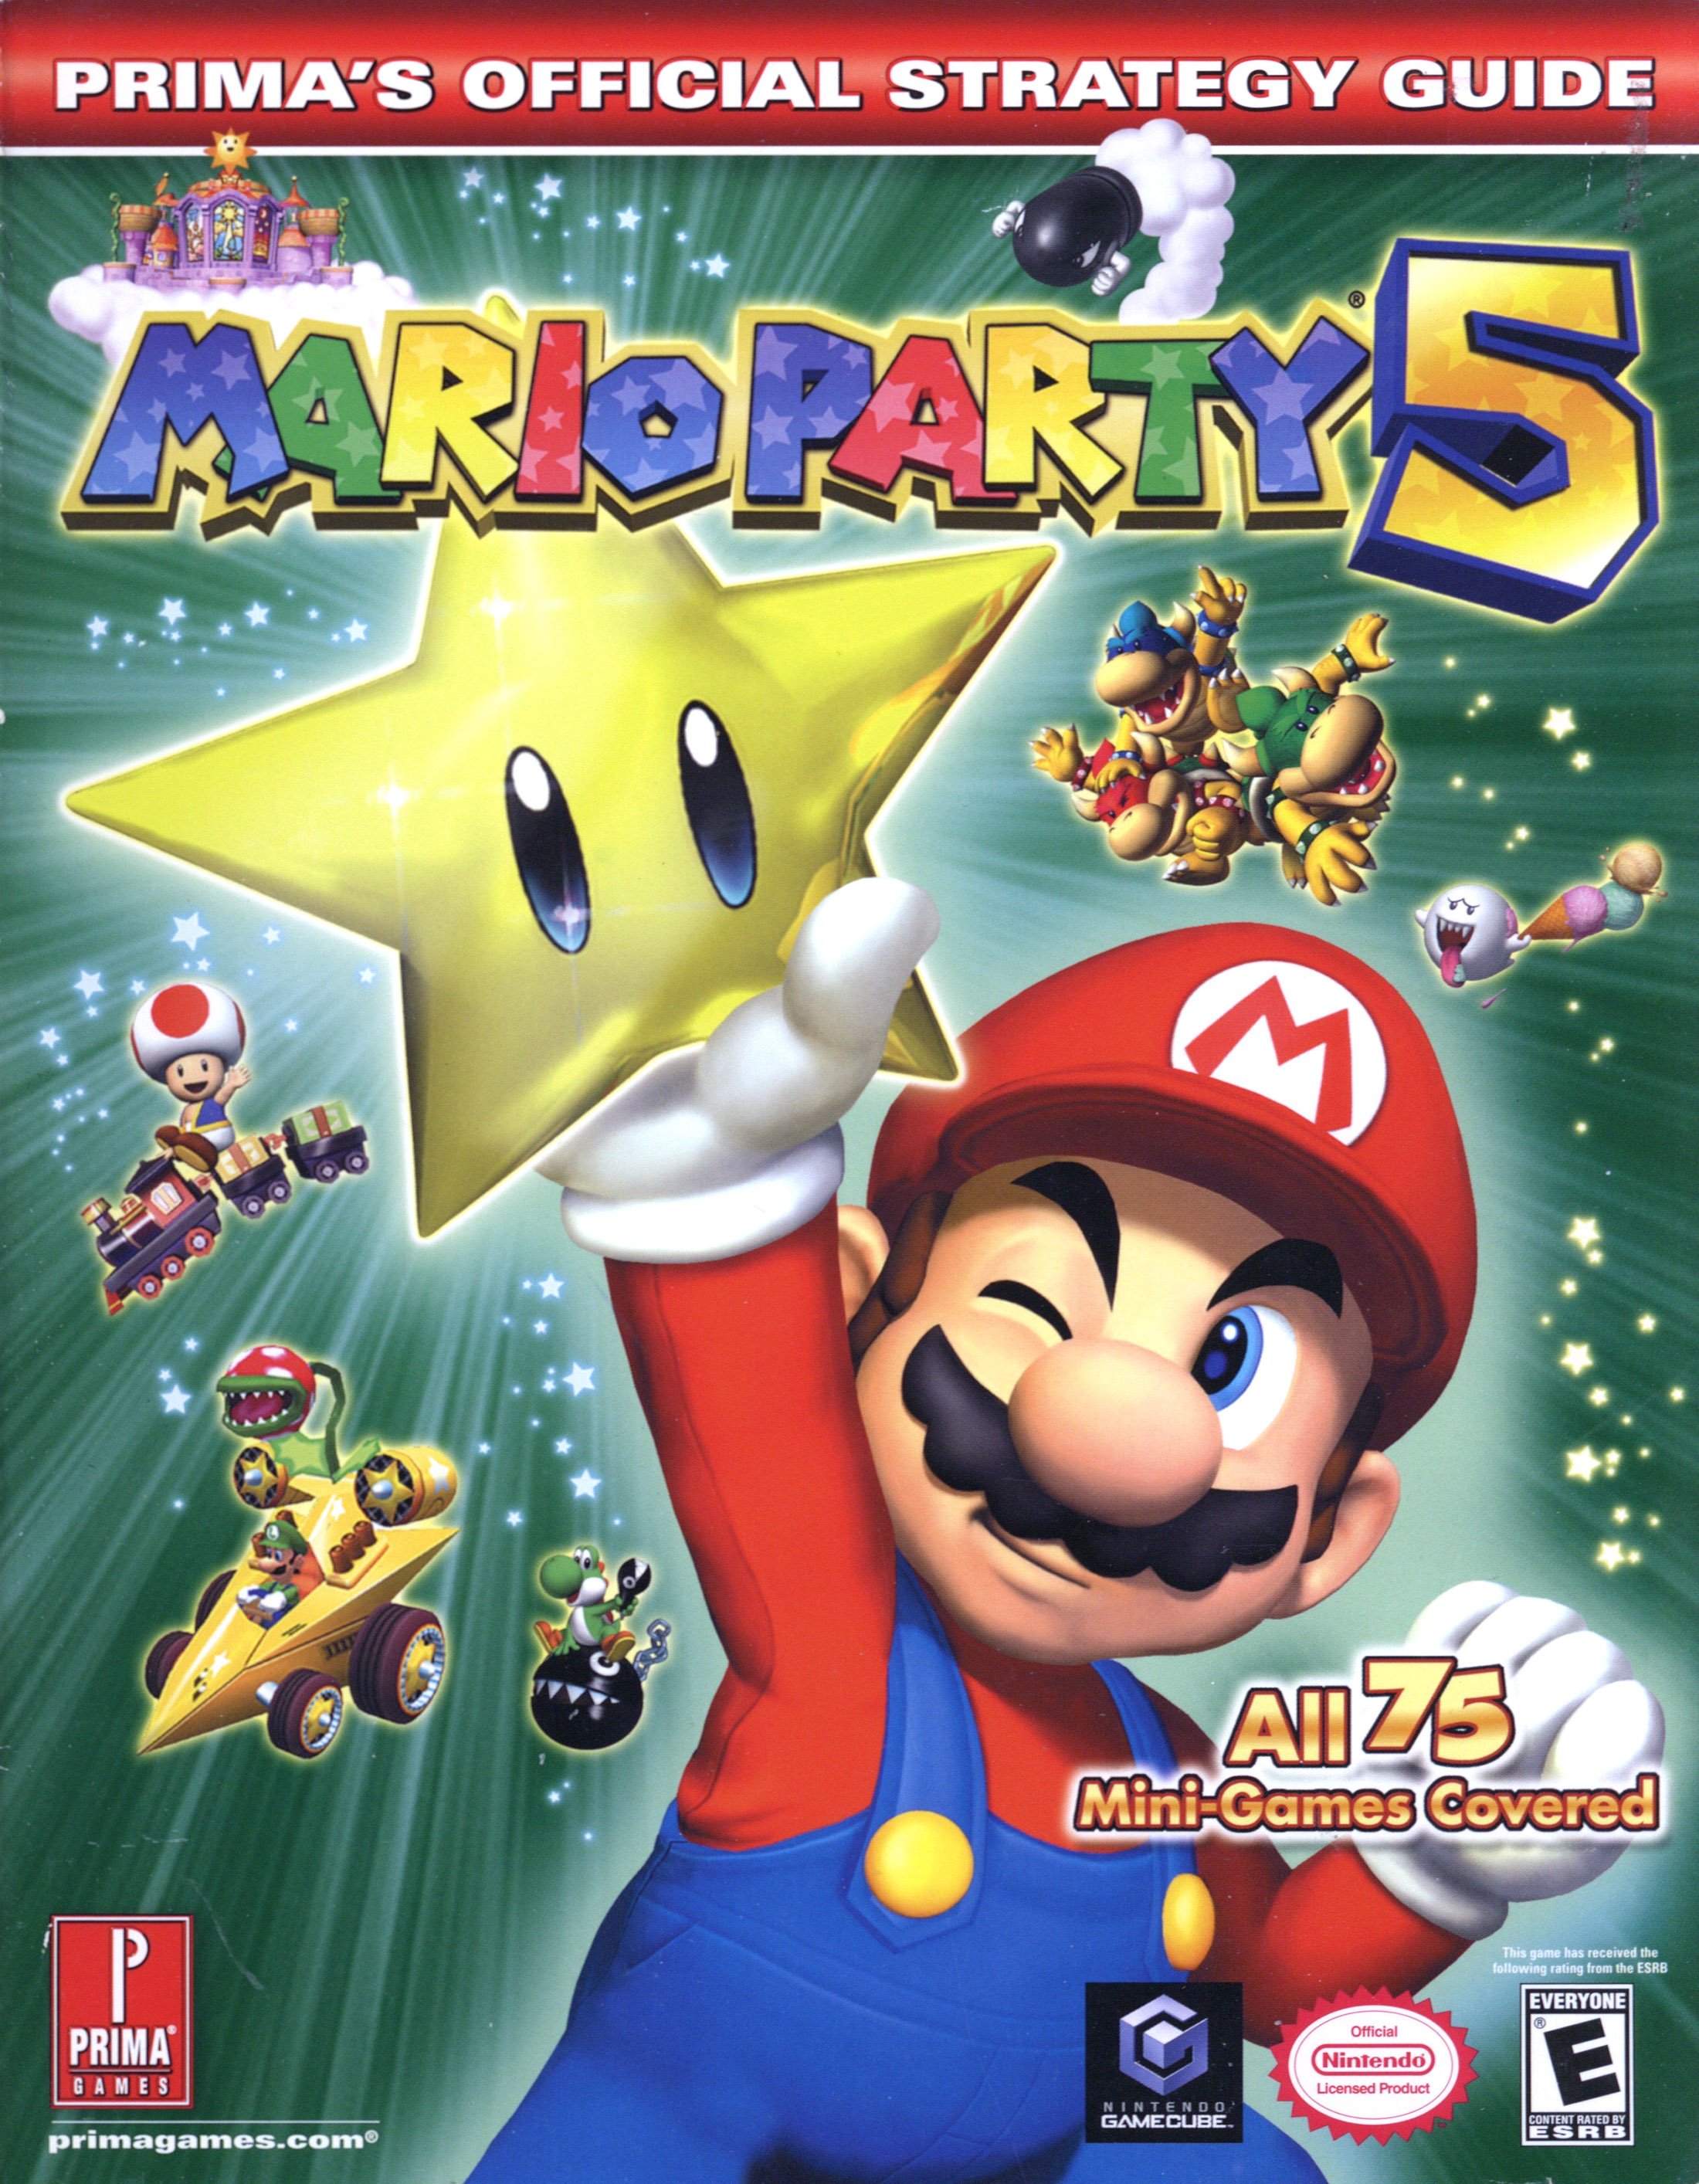 Mario Party 5 - Prima's Official Strategy Guide (2003)